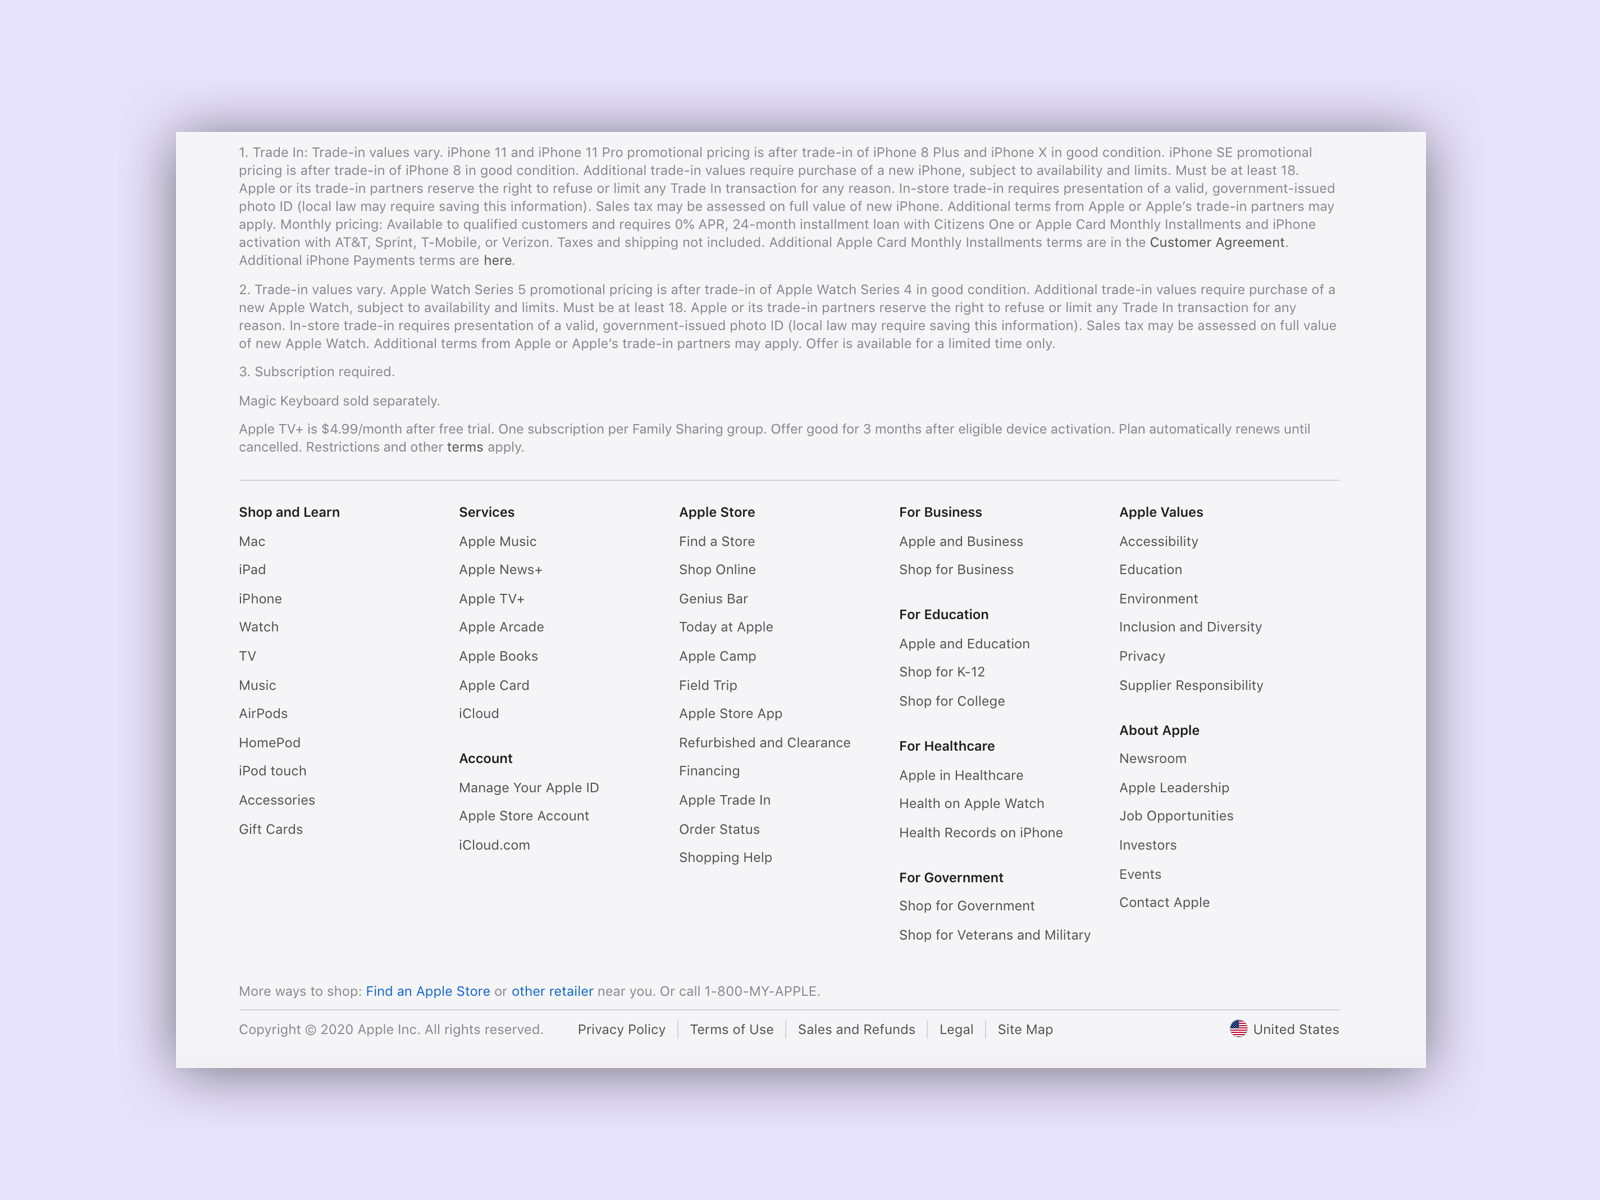 Apple lists the navigation again in the footer and also includes general settings and contact links there.